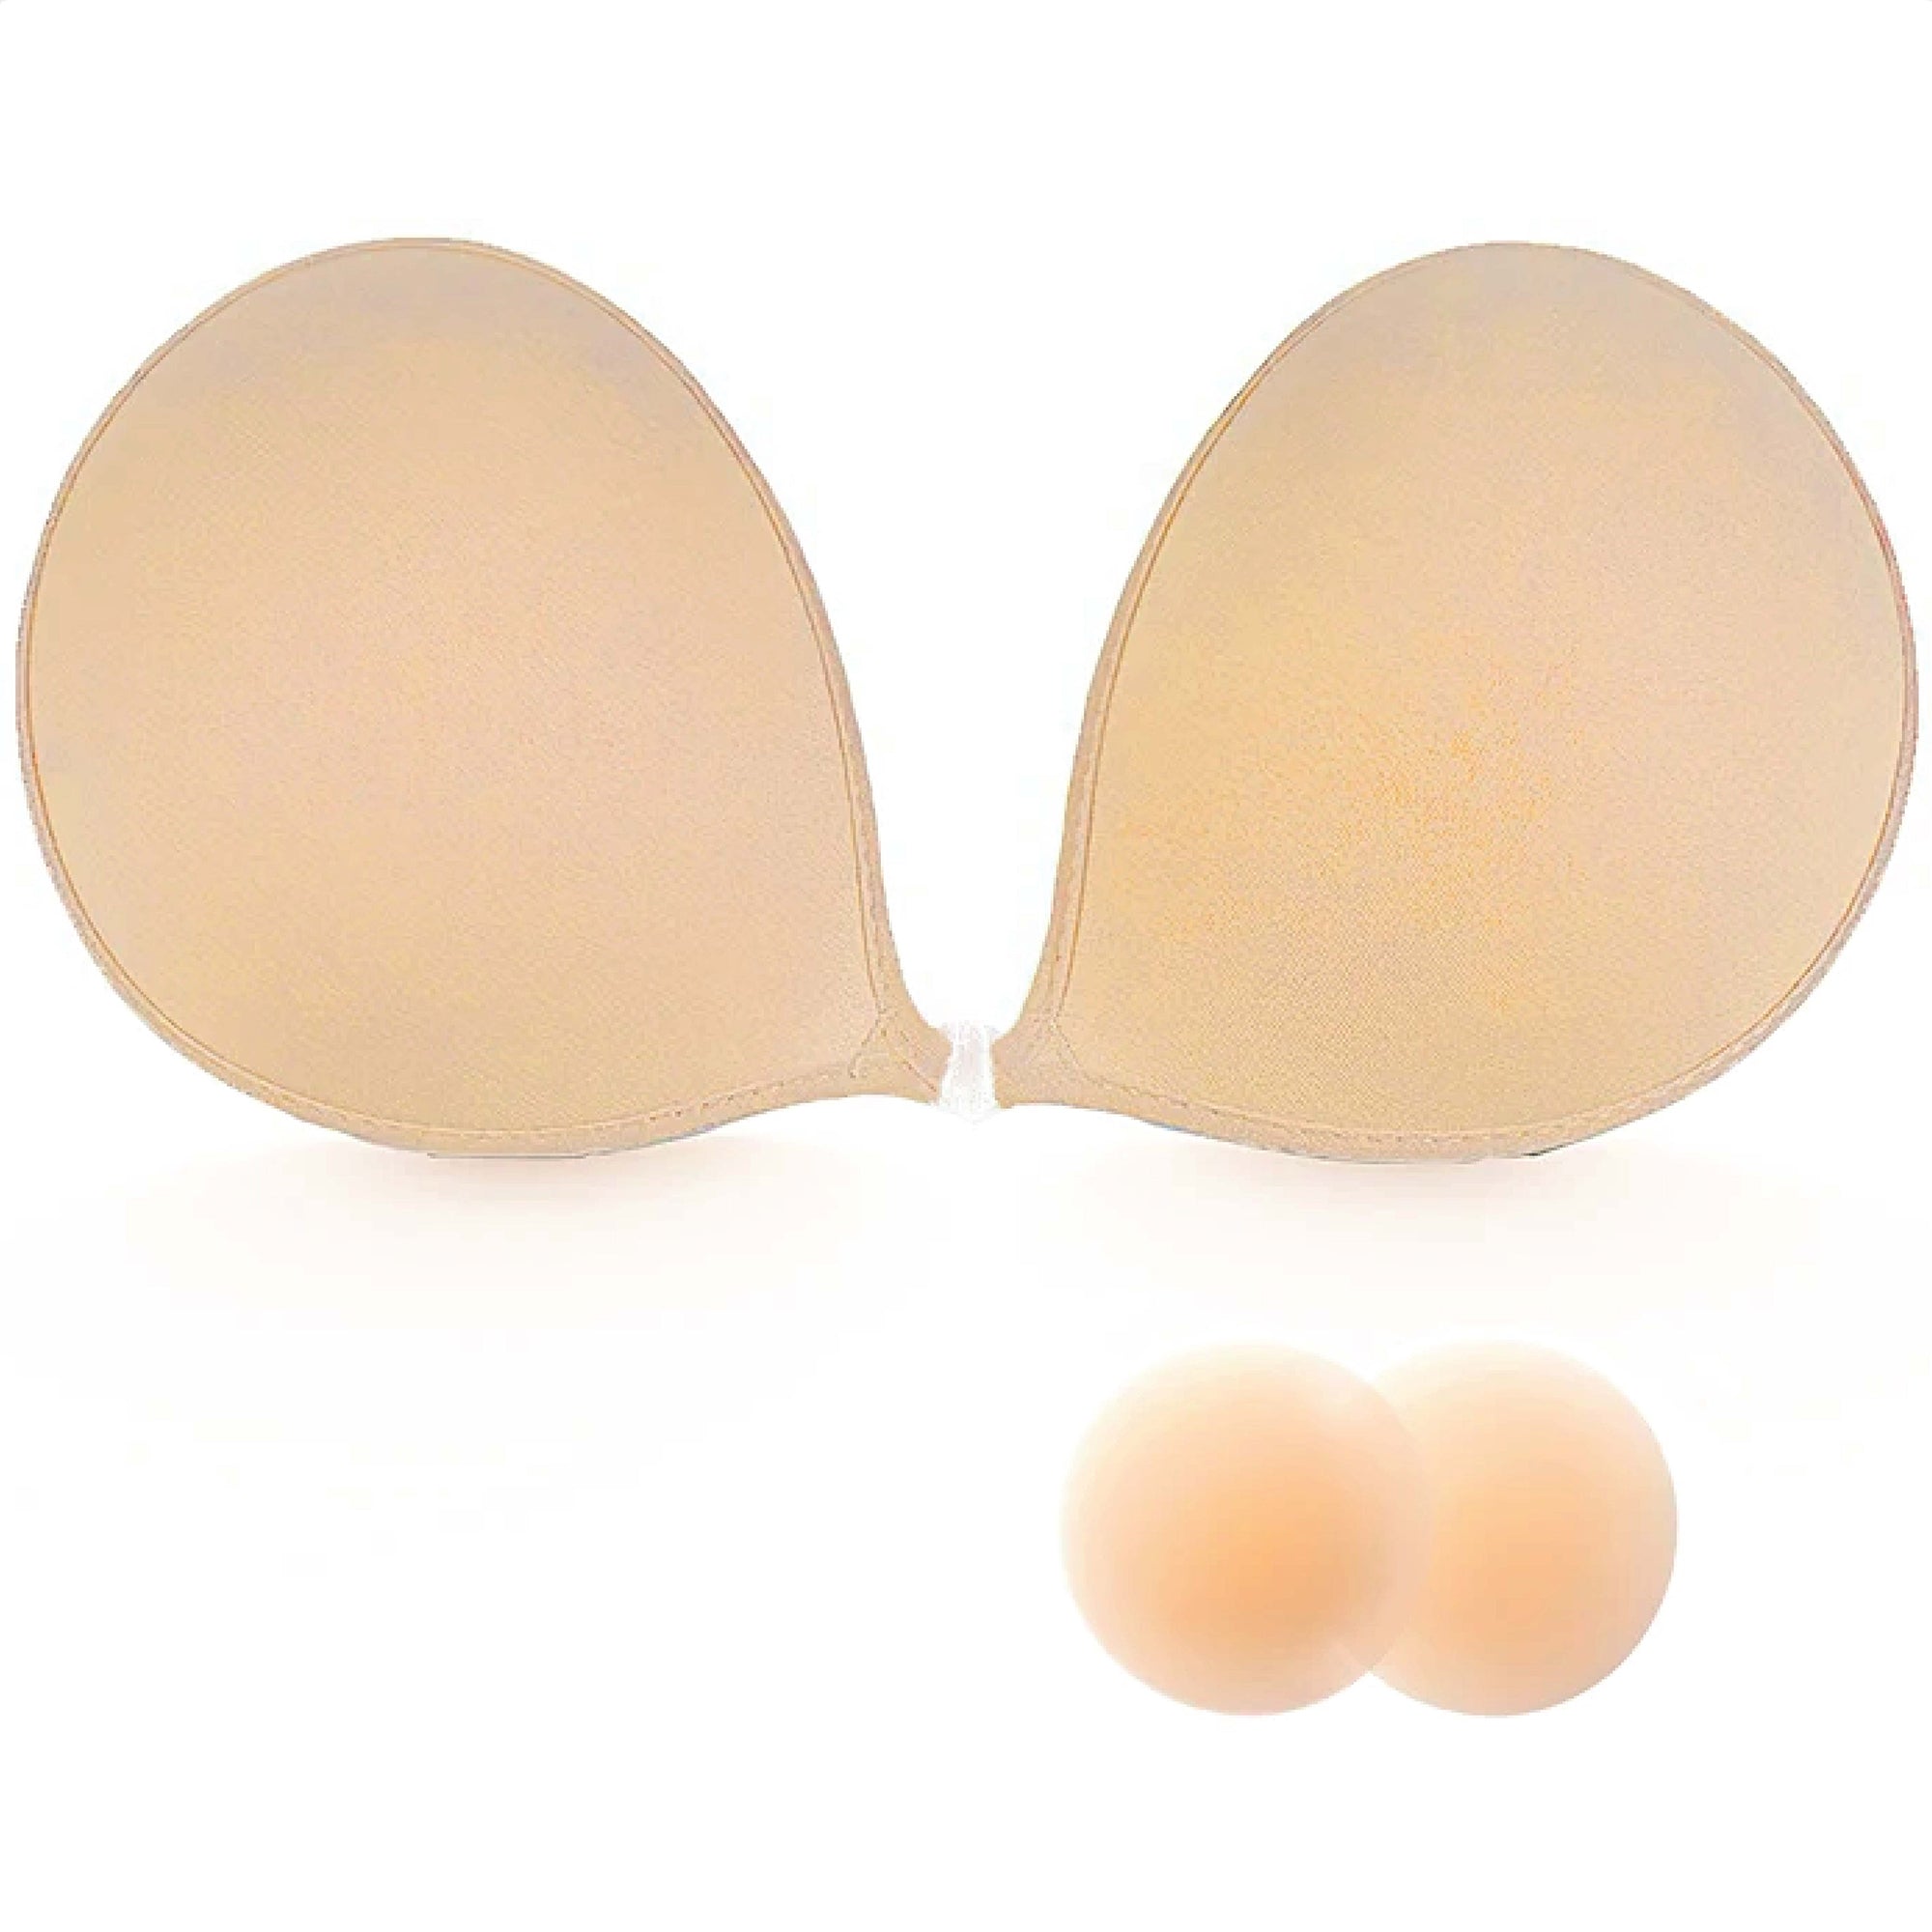 D CUP STRAPLESS BRA BACKLESS LIFT BREAST ENHANCER TAPE 4 PAIRS